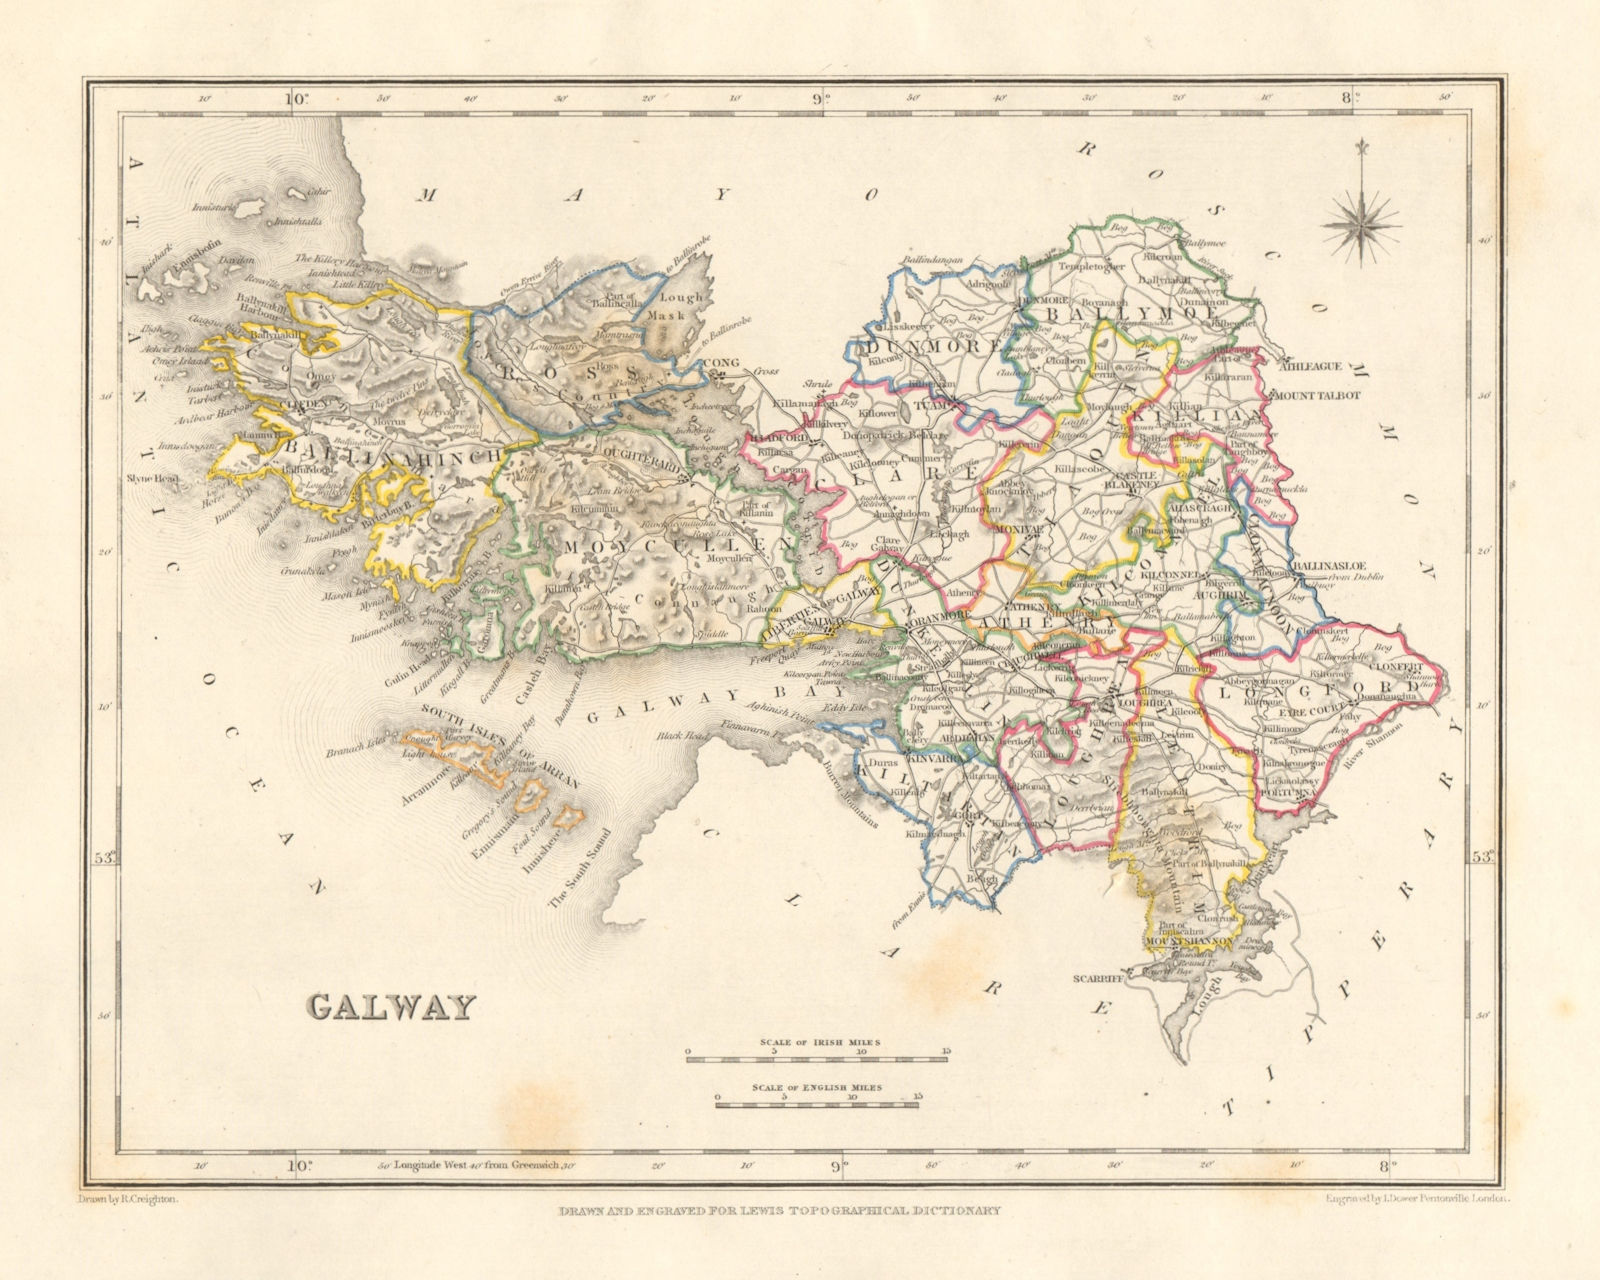 Associate Product COUNTY GALWAY antique map for LEWIS by DOWER & CREIGHTON. Ireland 1846 old